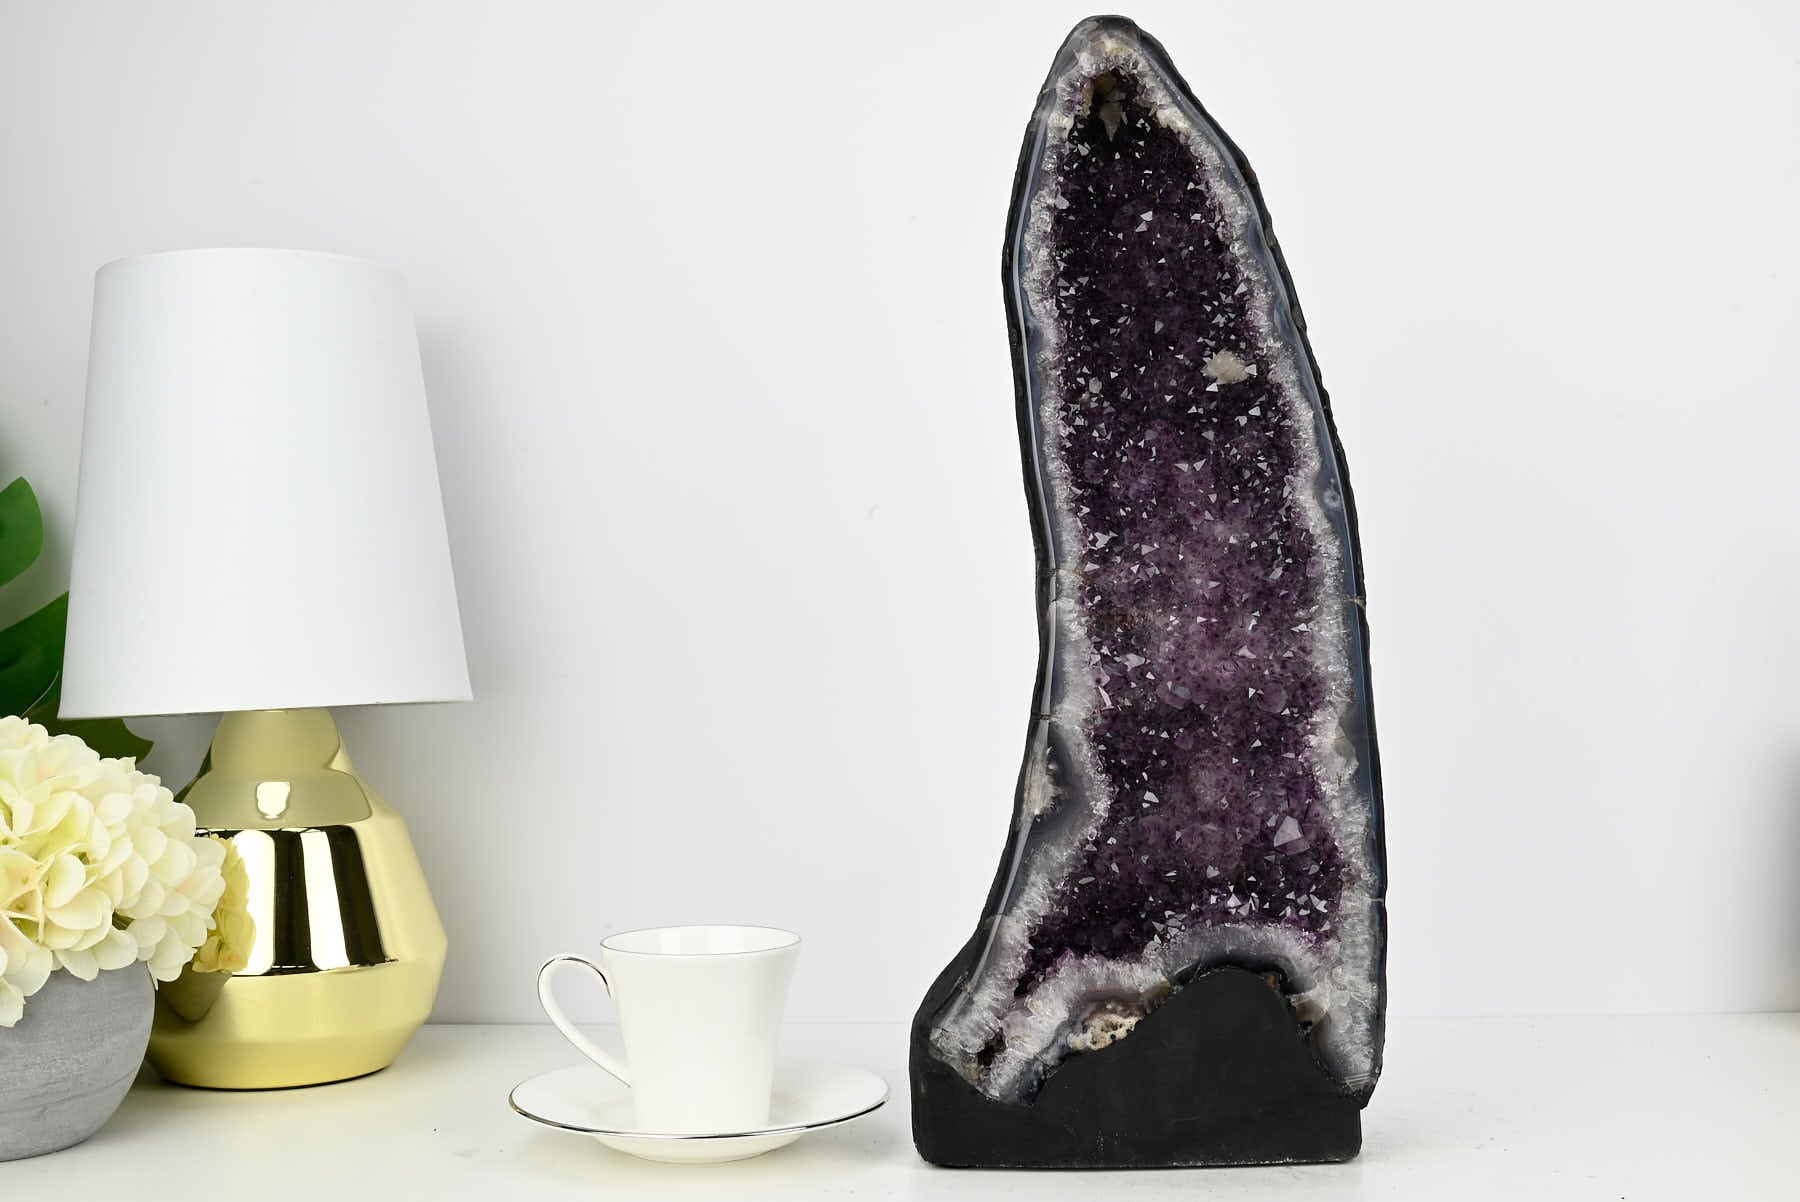 Extra Quality Amethyst Cathedral - 8.53kg, 47cm tall - #CAAMET-10069